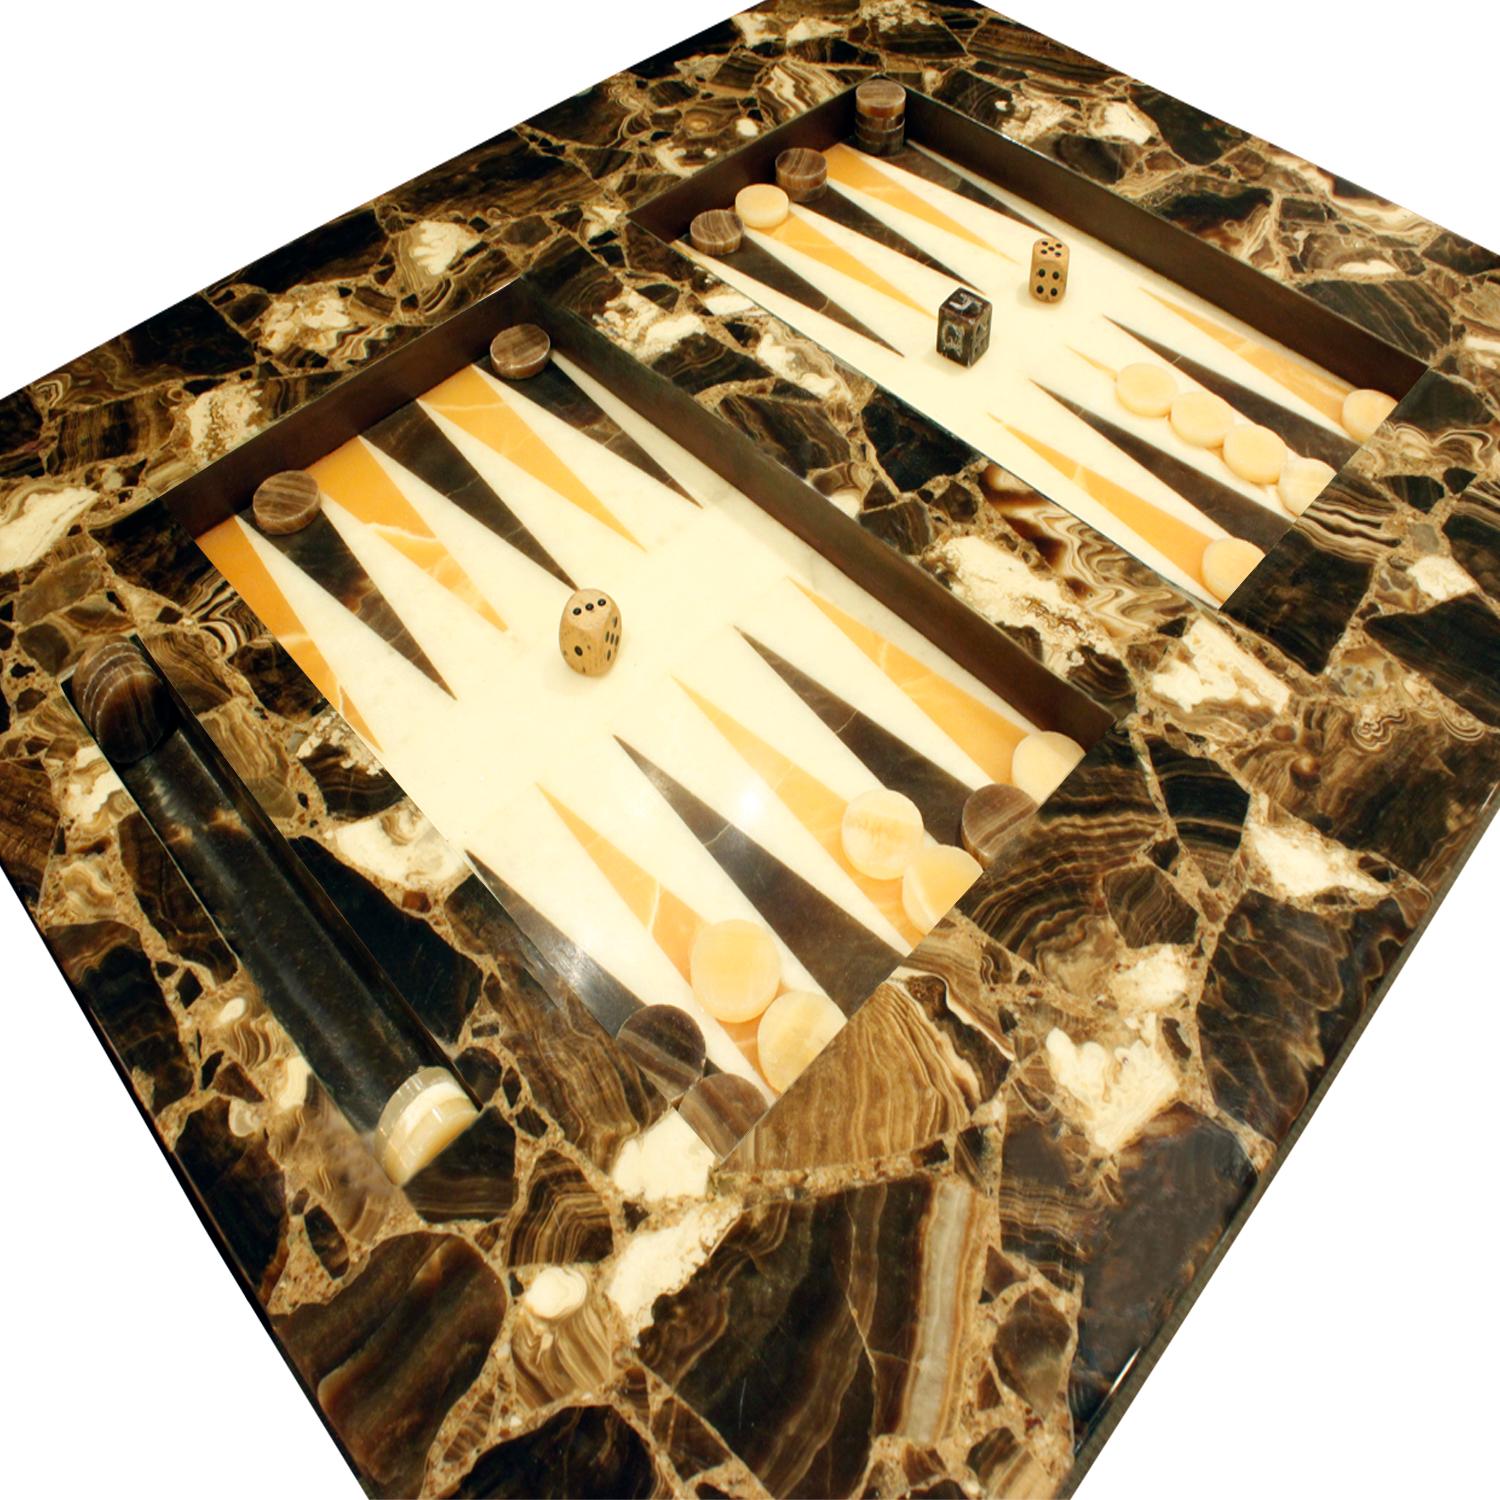 Mexican Arturo Pani Exceptional Backgammon Table in Onyx, 1960s